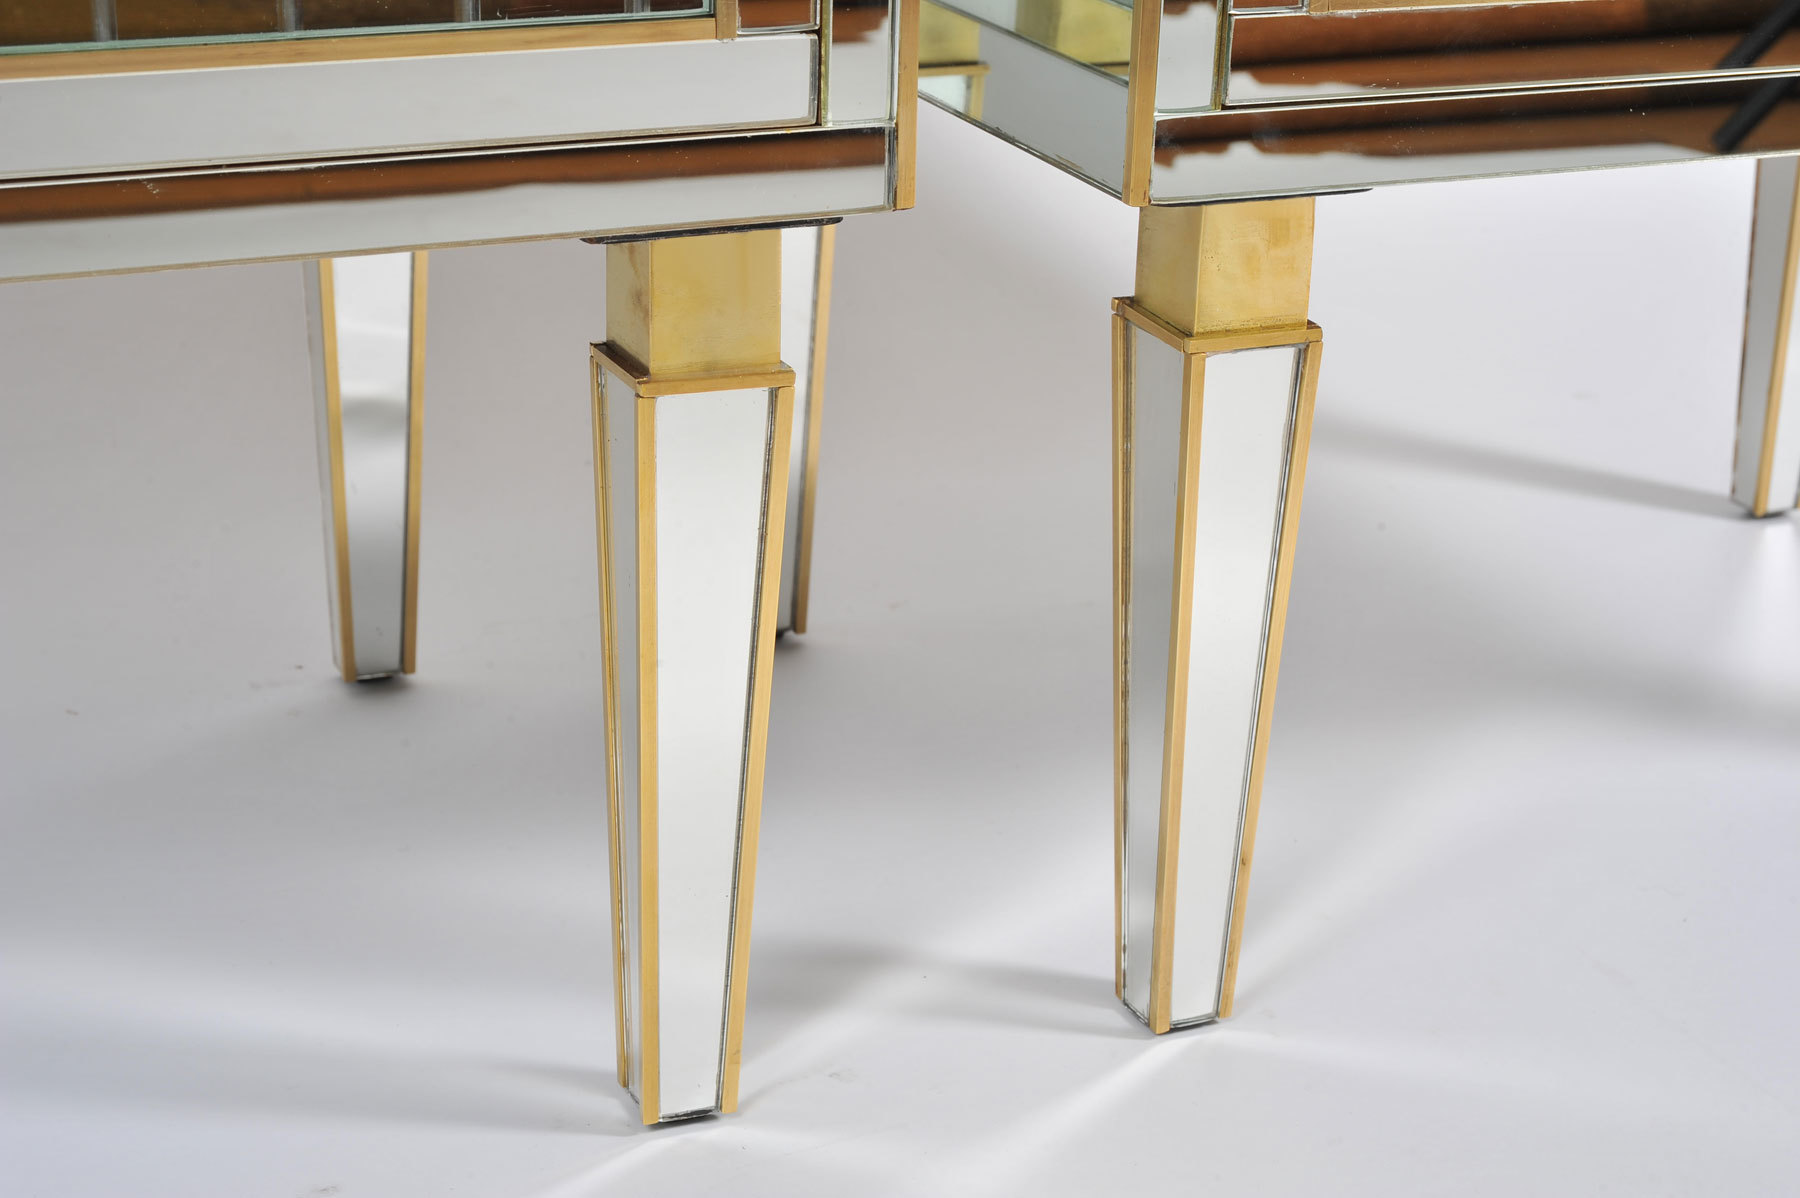 The image for Pair Of Mirrored Chests 05 Vw